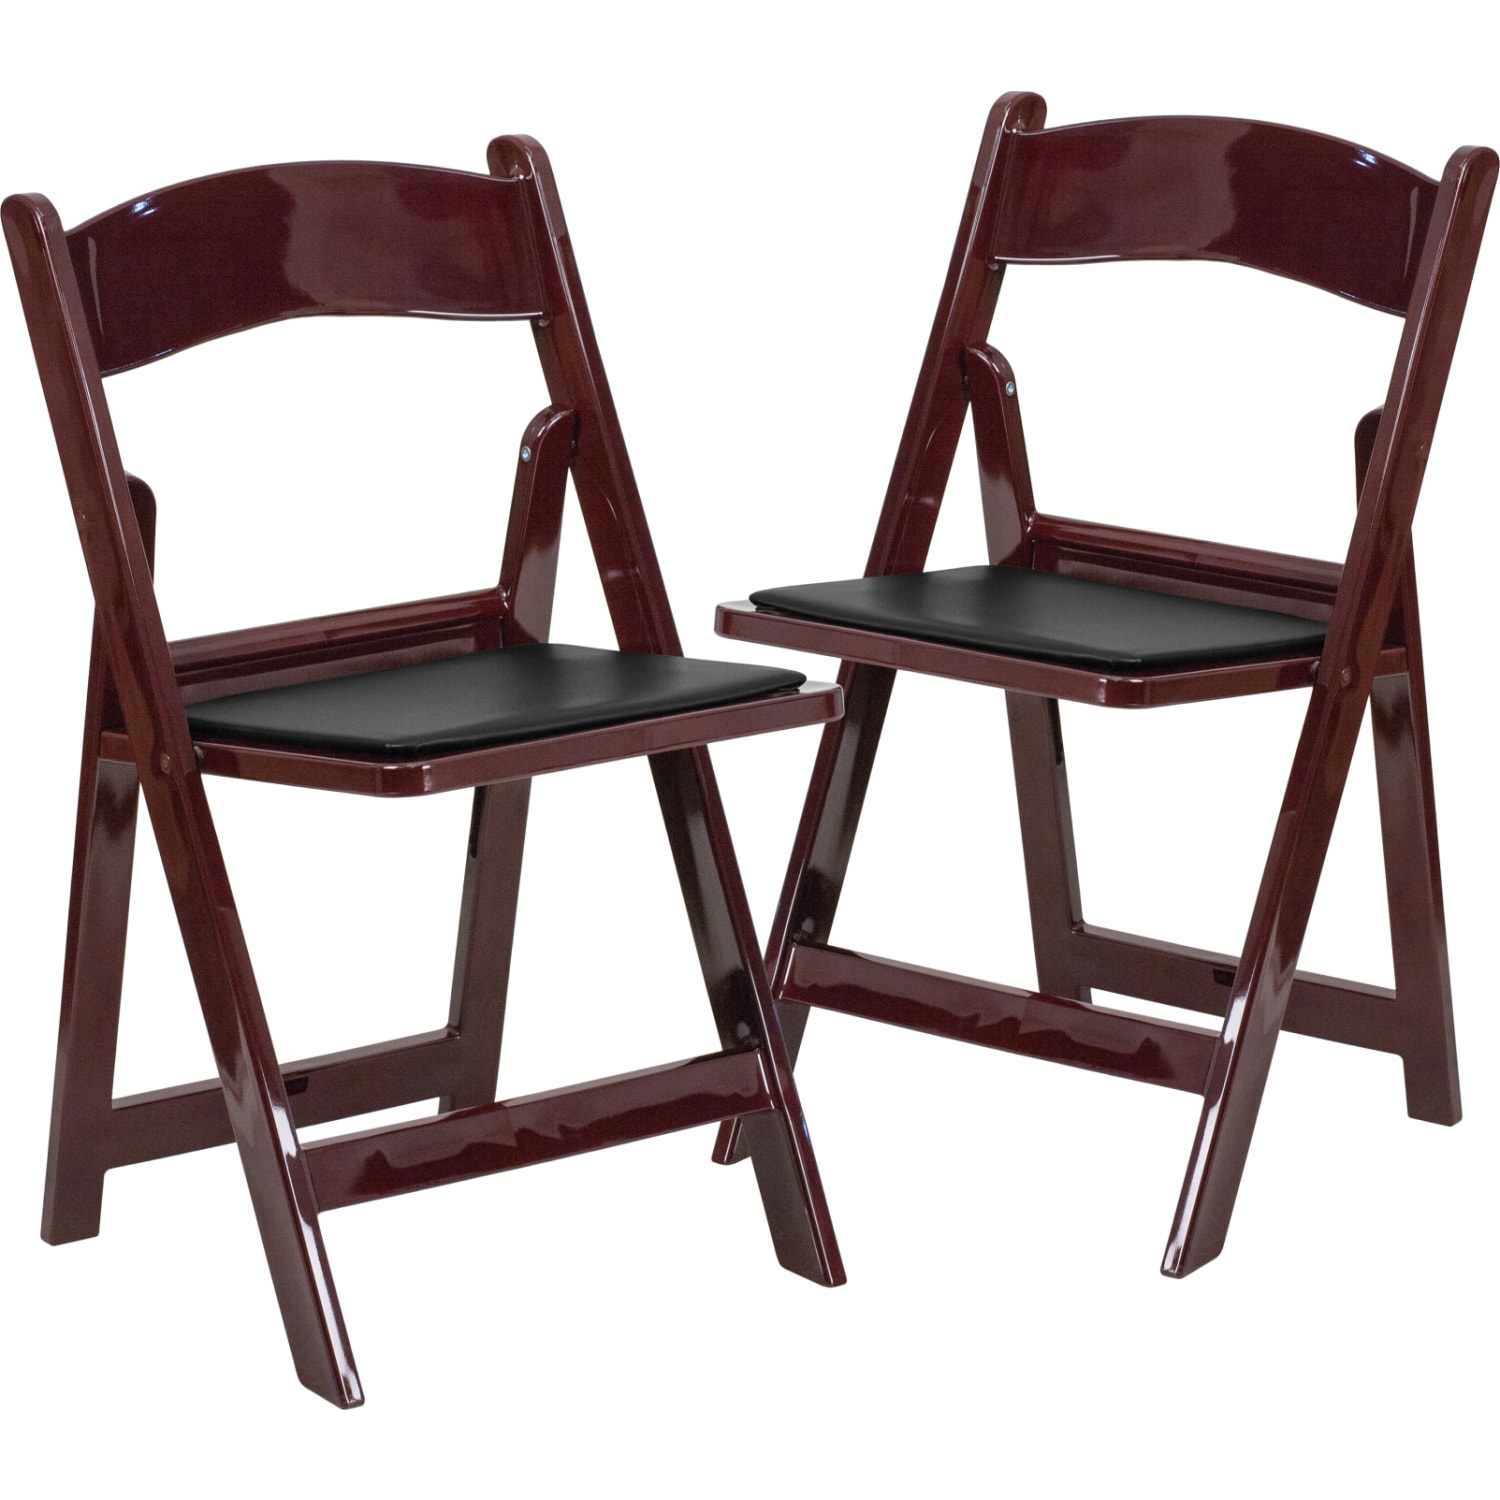 Hercules Folding Chair - Red Mahogany Resin - 2 Pack Comfortable Event Chair - Light Weight Folding Chair